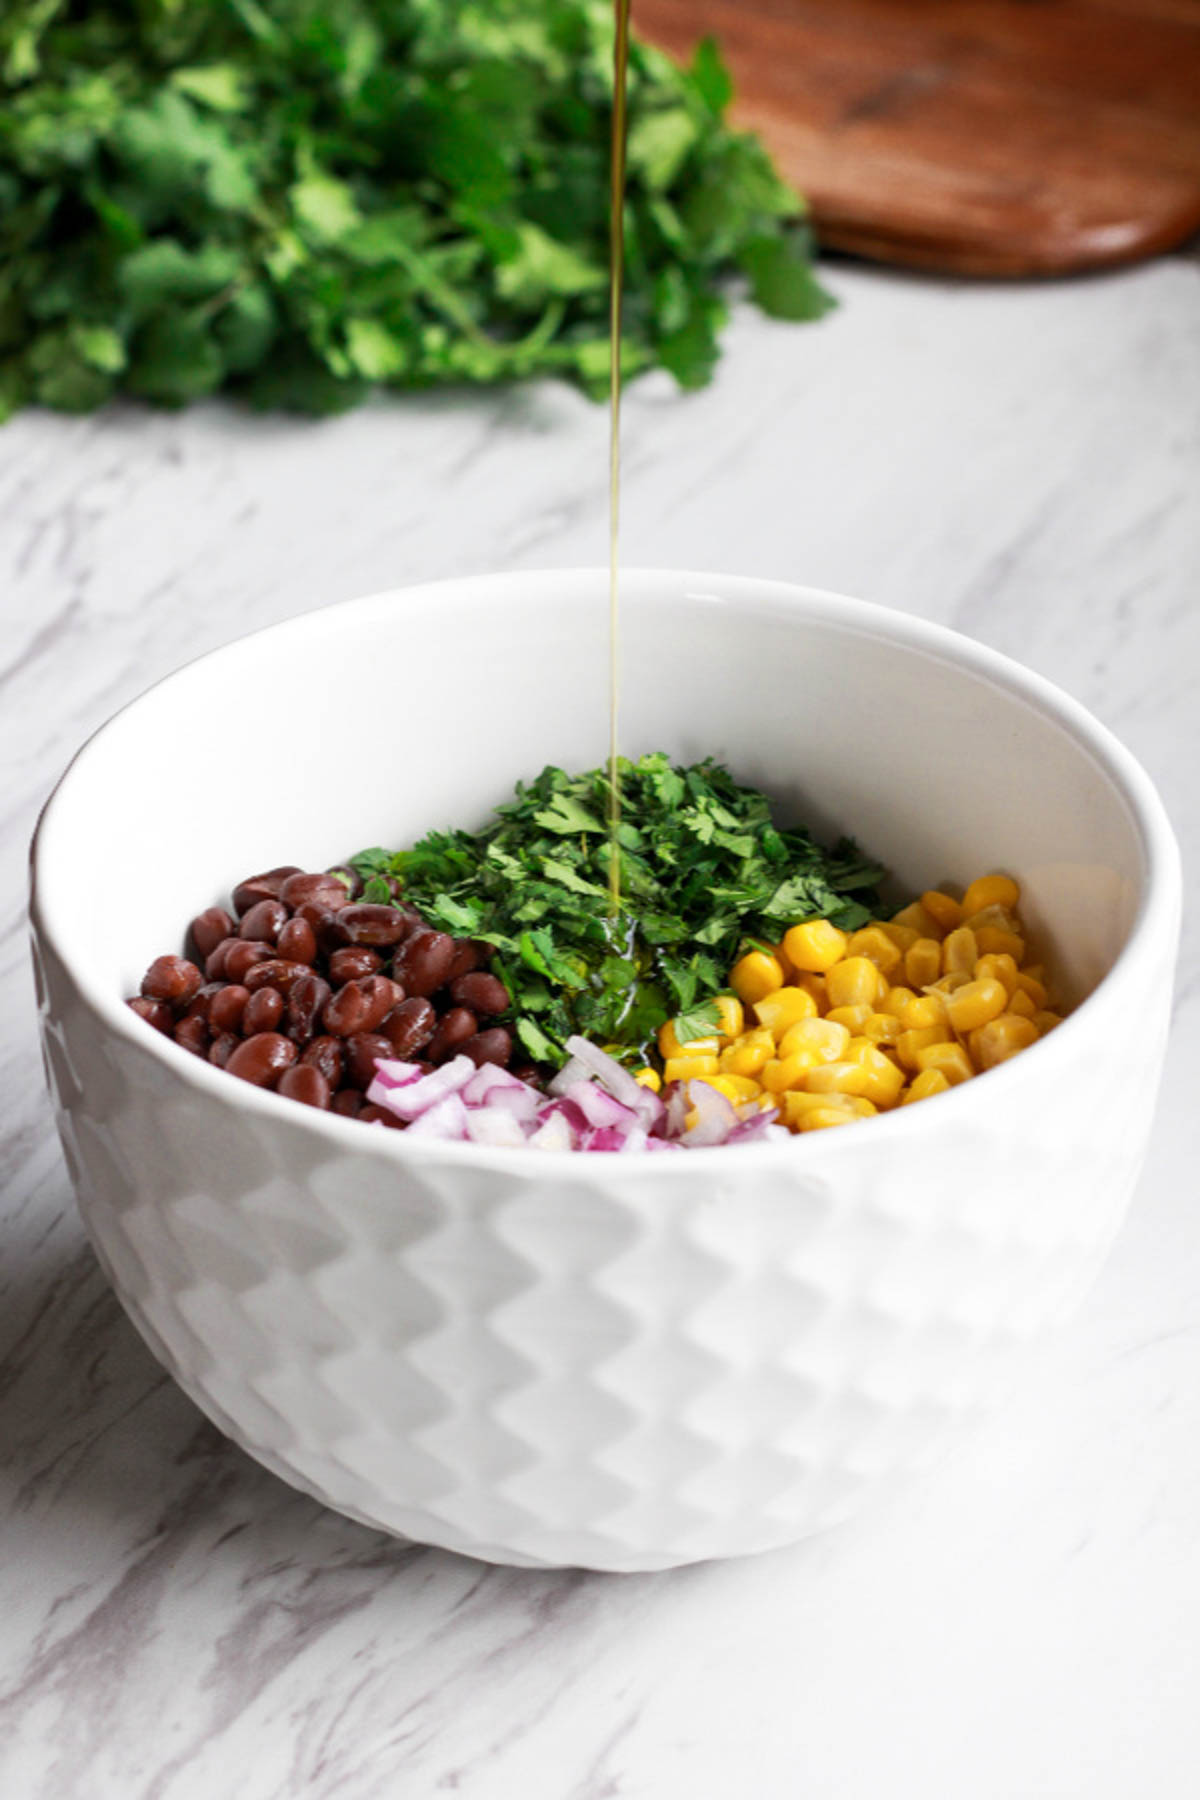 Corn and black beans in a white bowl.